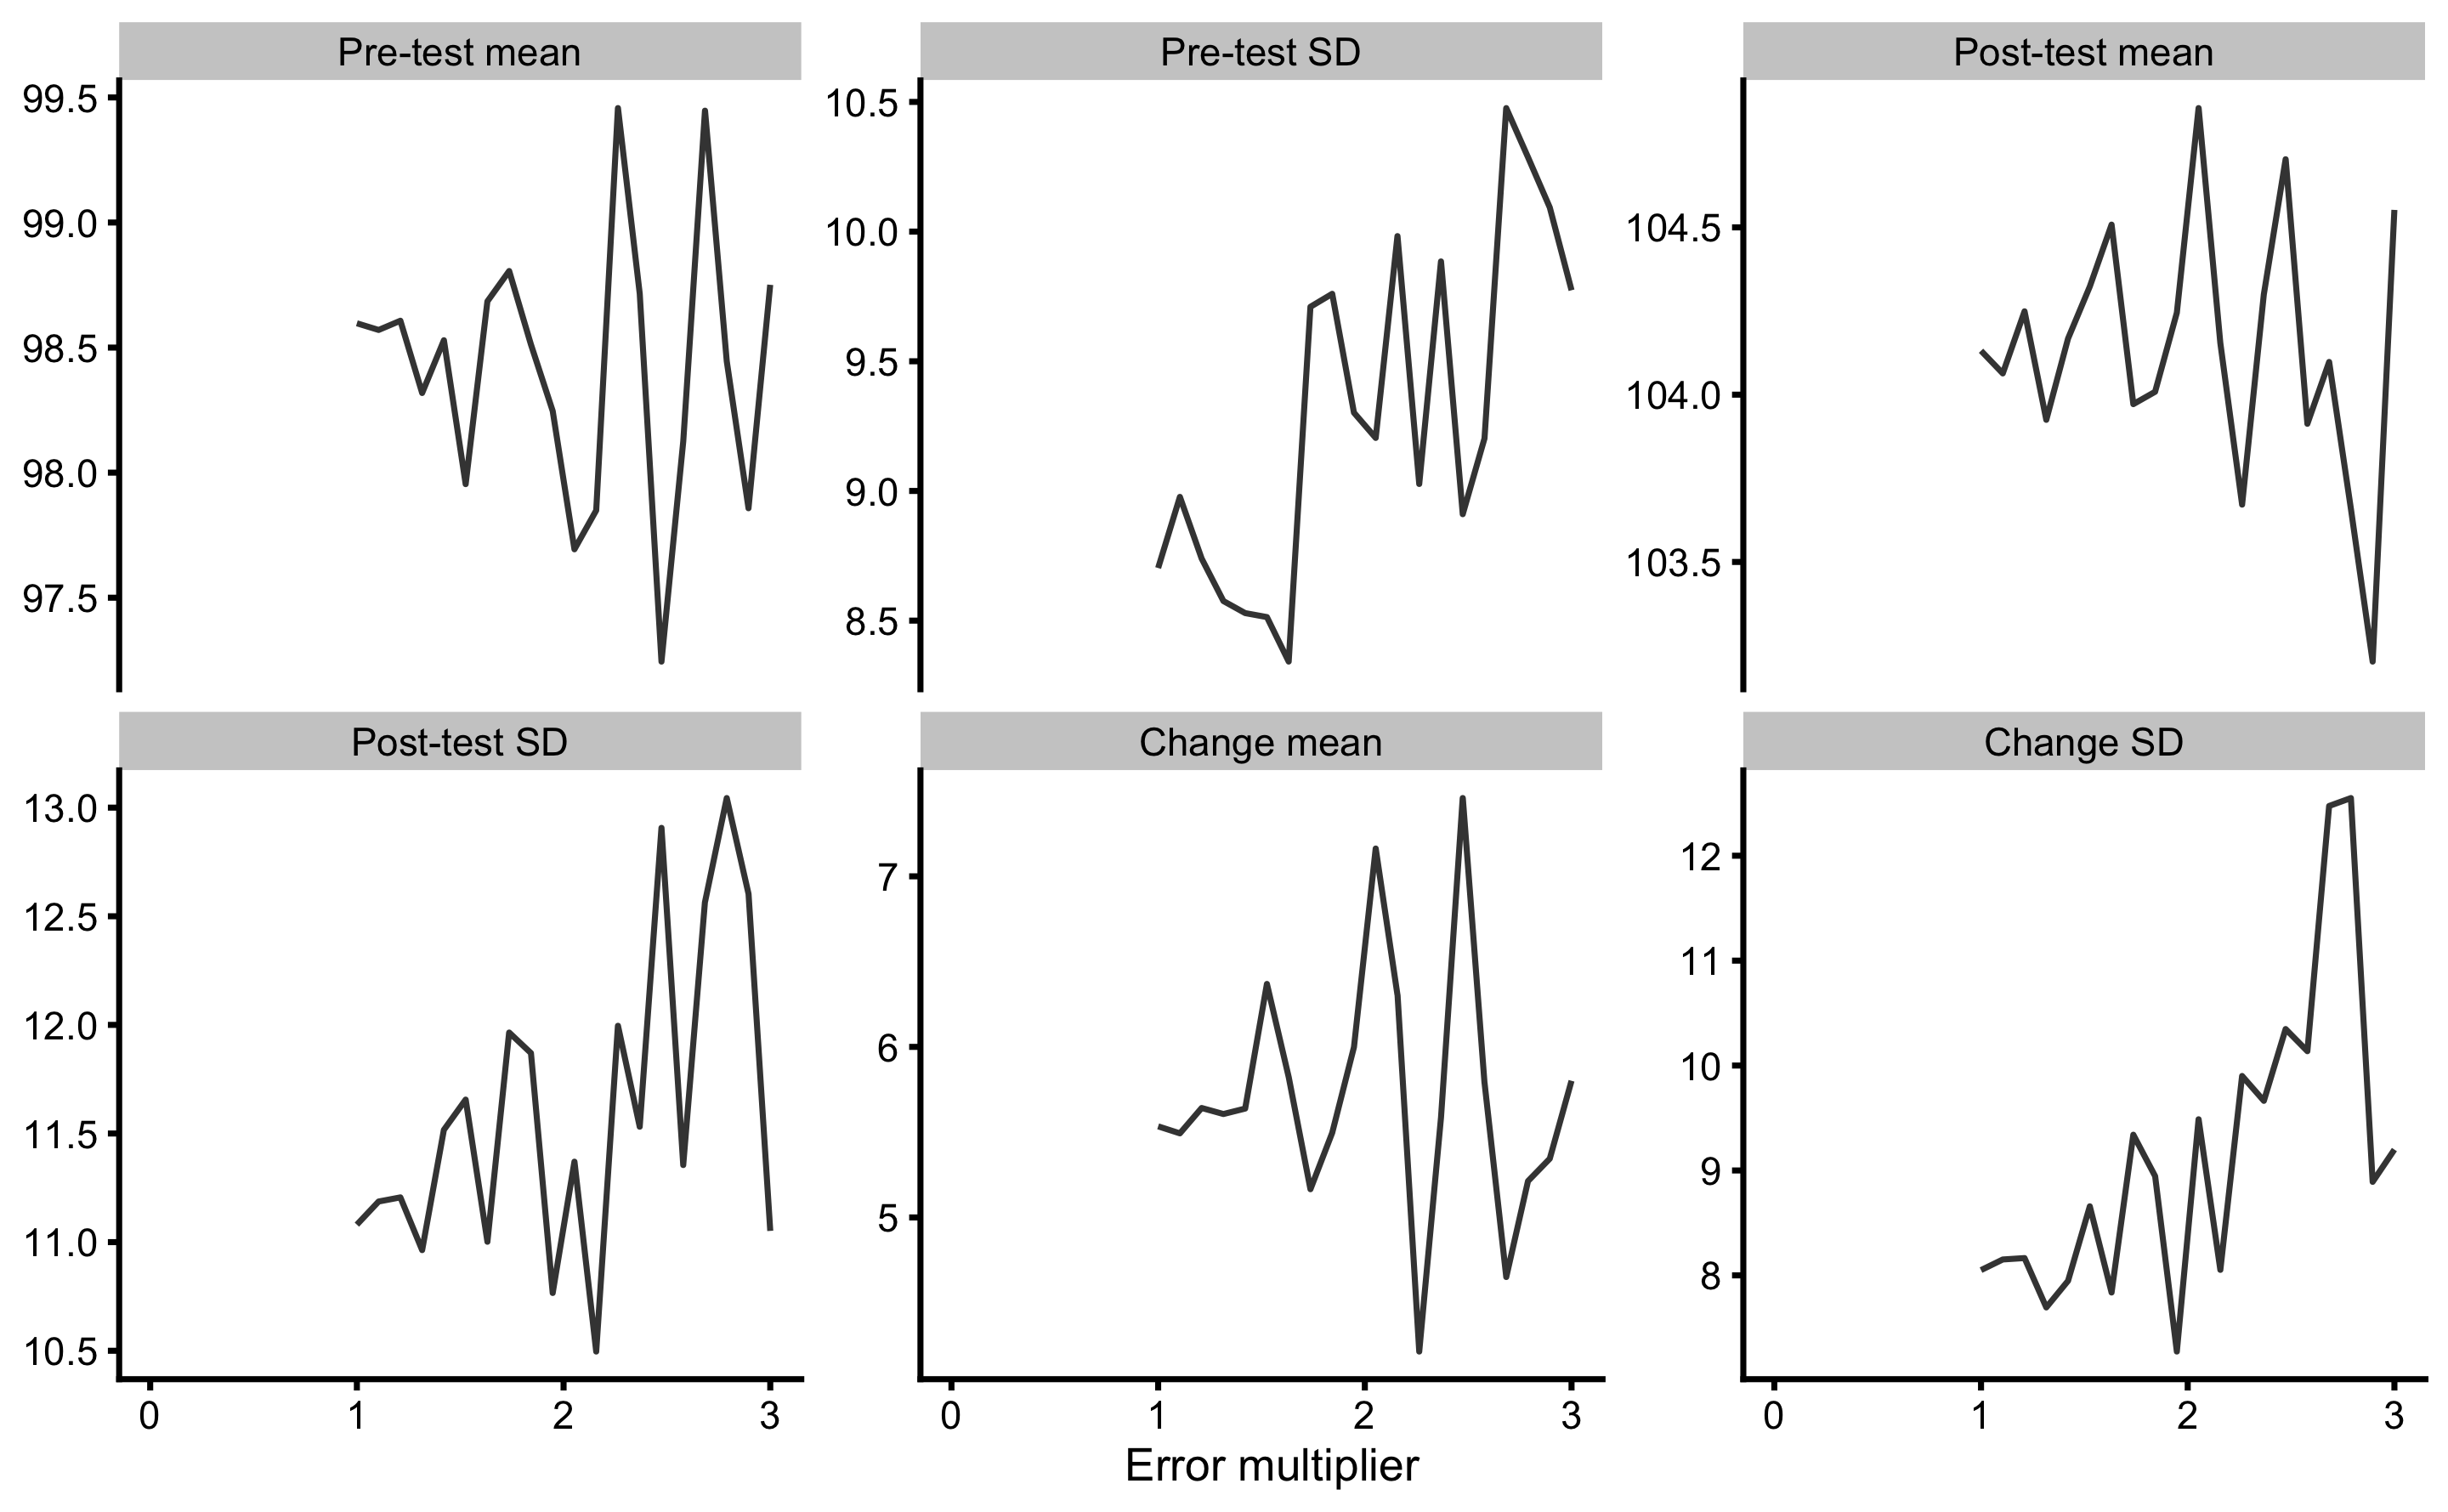 Adding noise (measurement error) to observed Pre-test and Post-test scores and re-calculating estimators. Error multiplier equal to 1 is naive analysis where one magnitude of measurement error (i.e. 2.5kg) is already involved in observed data. Additional error is added using error multiplier (i.e. error multiplier 2 involves additional noise of 2.5 kg magnitude, thus 2 error magnitudes are involved in the data) from 1 to 3, using total of 20 steps